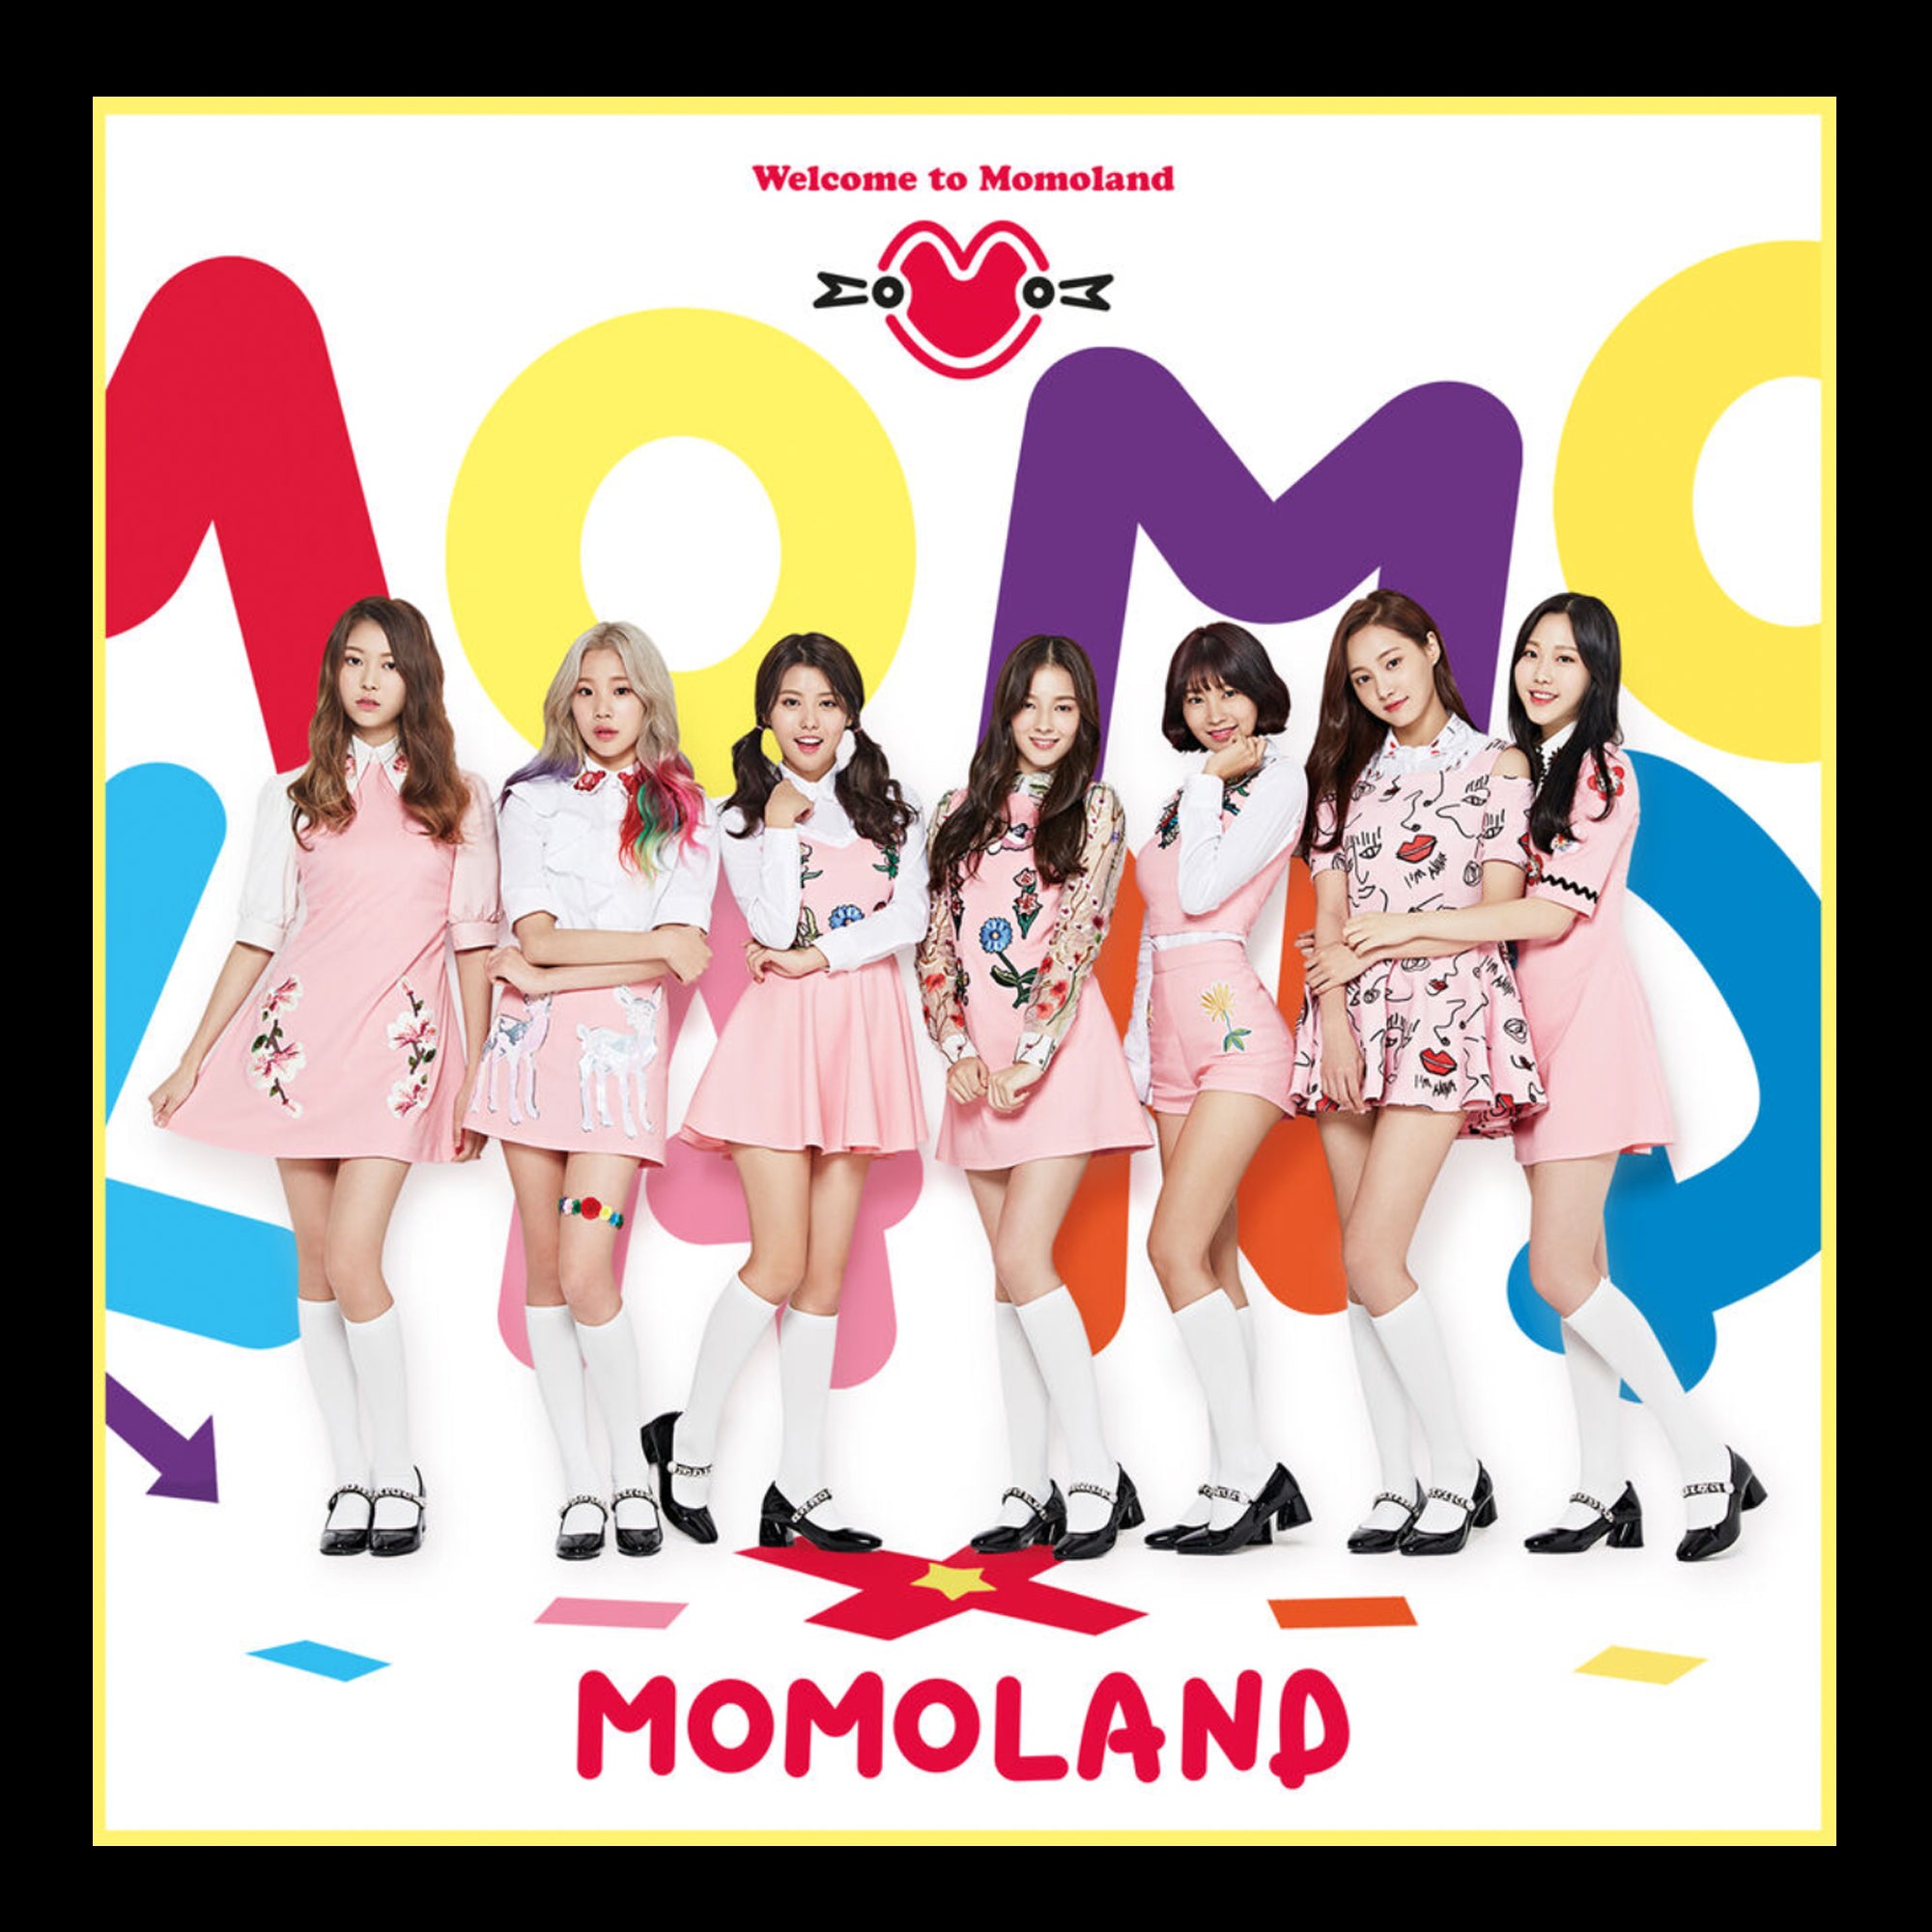 MOMOLAND - Welcome to Momoland